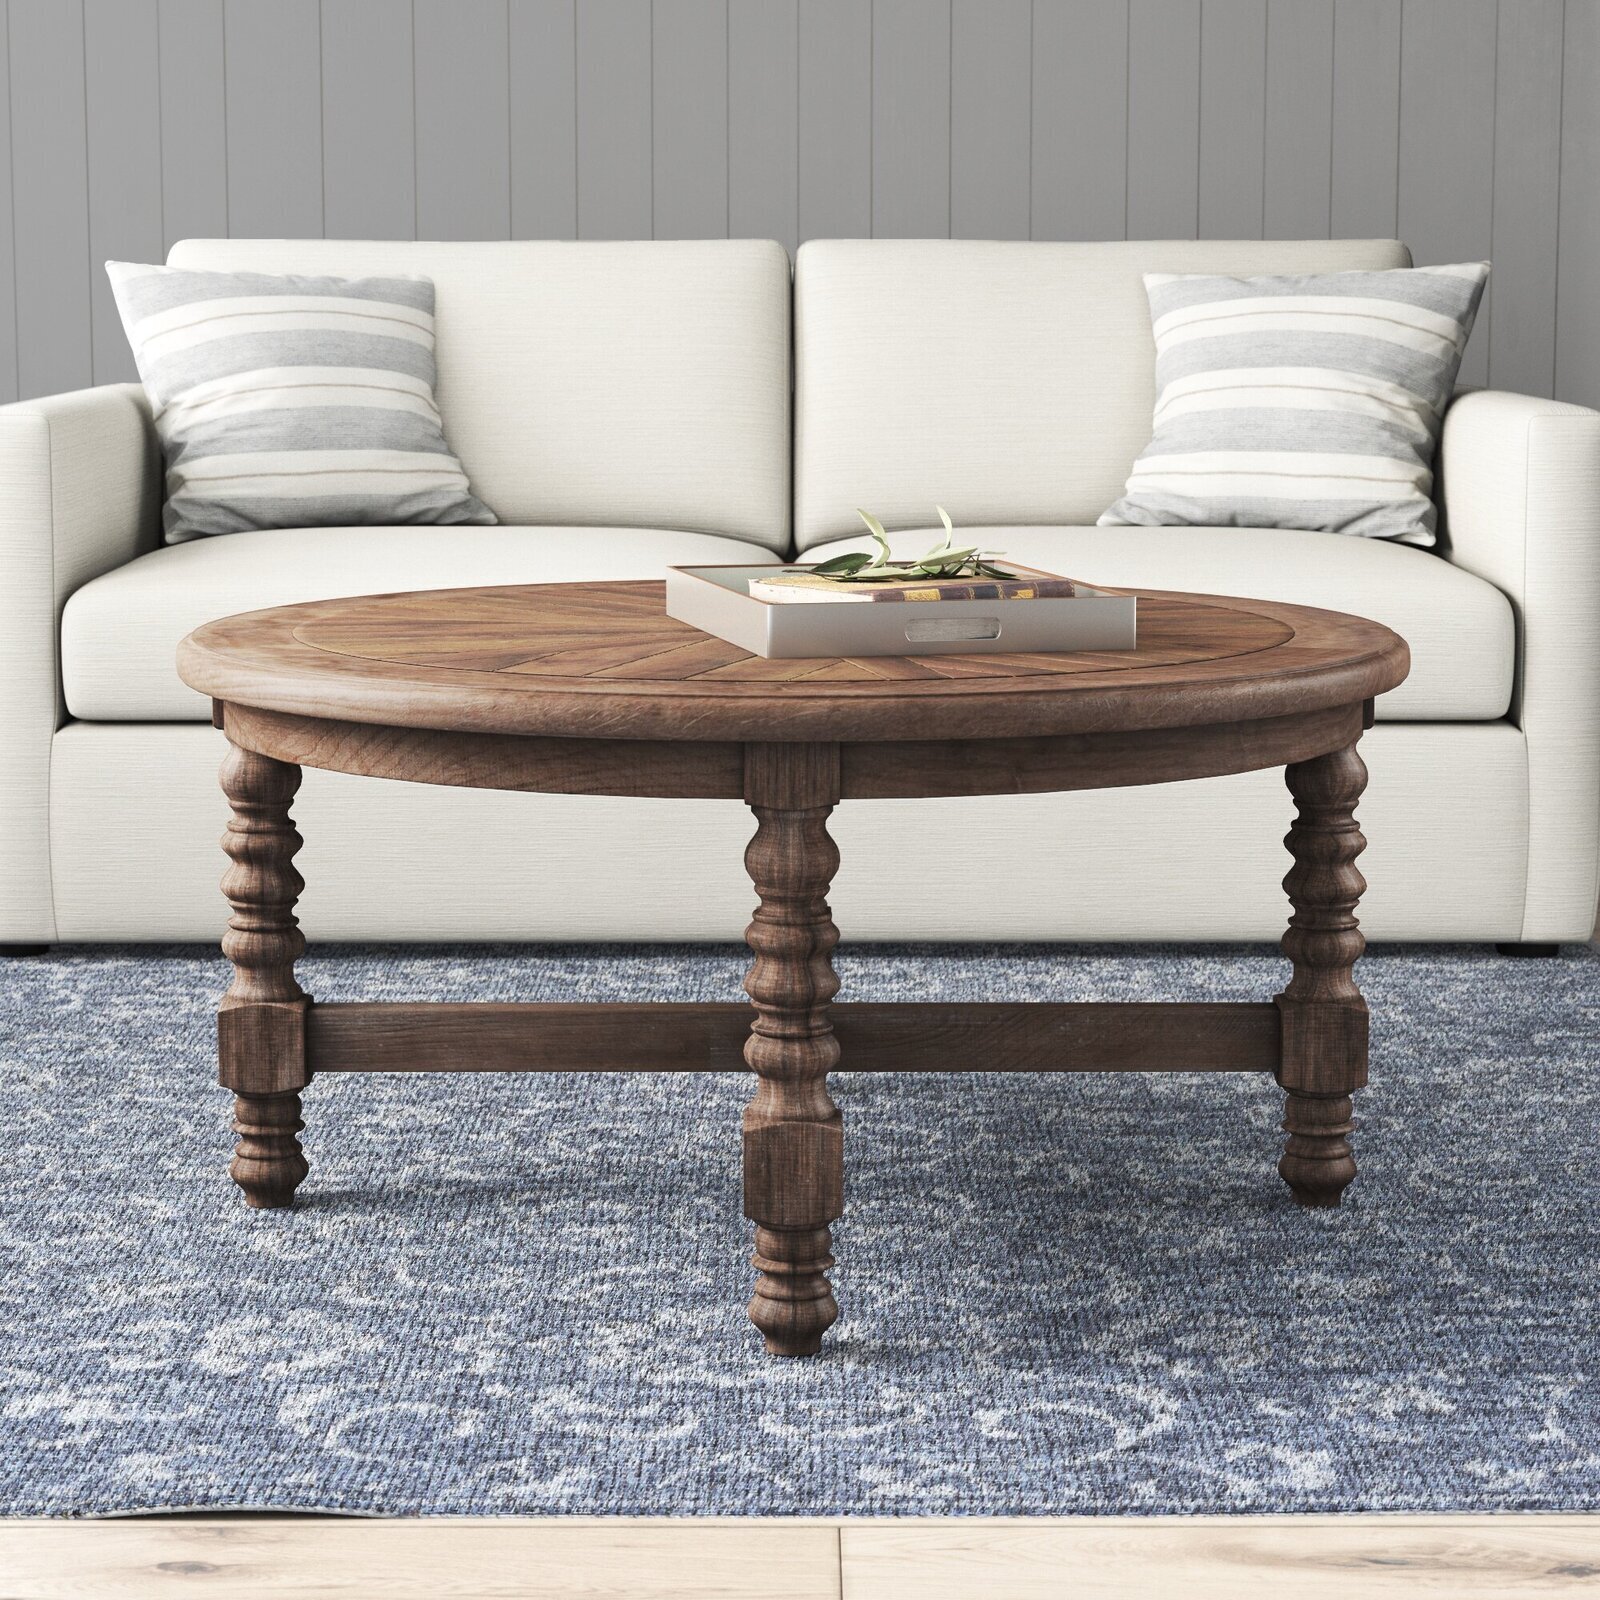 Solid Fir Round Wood Coffee Table